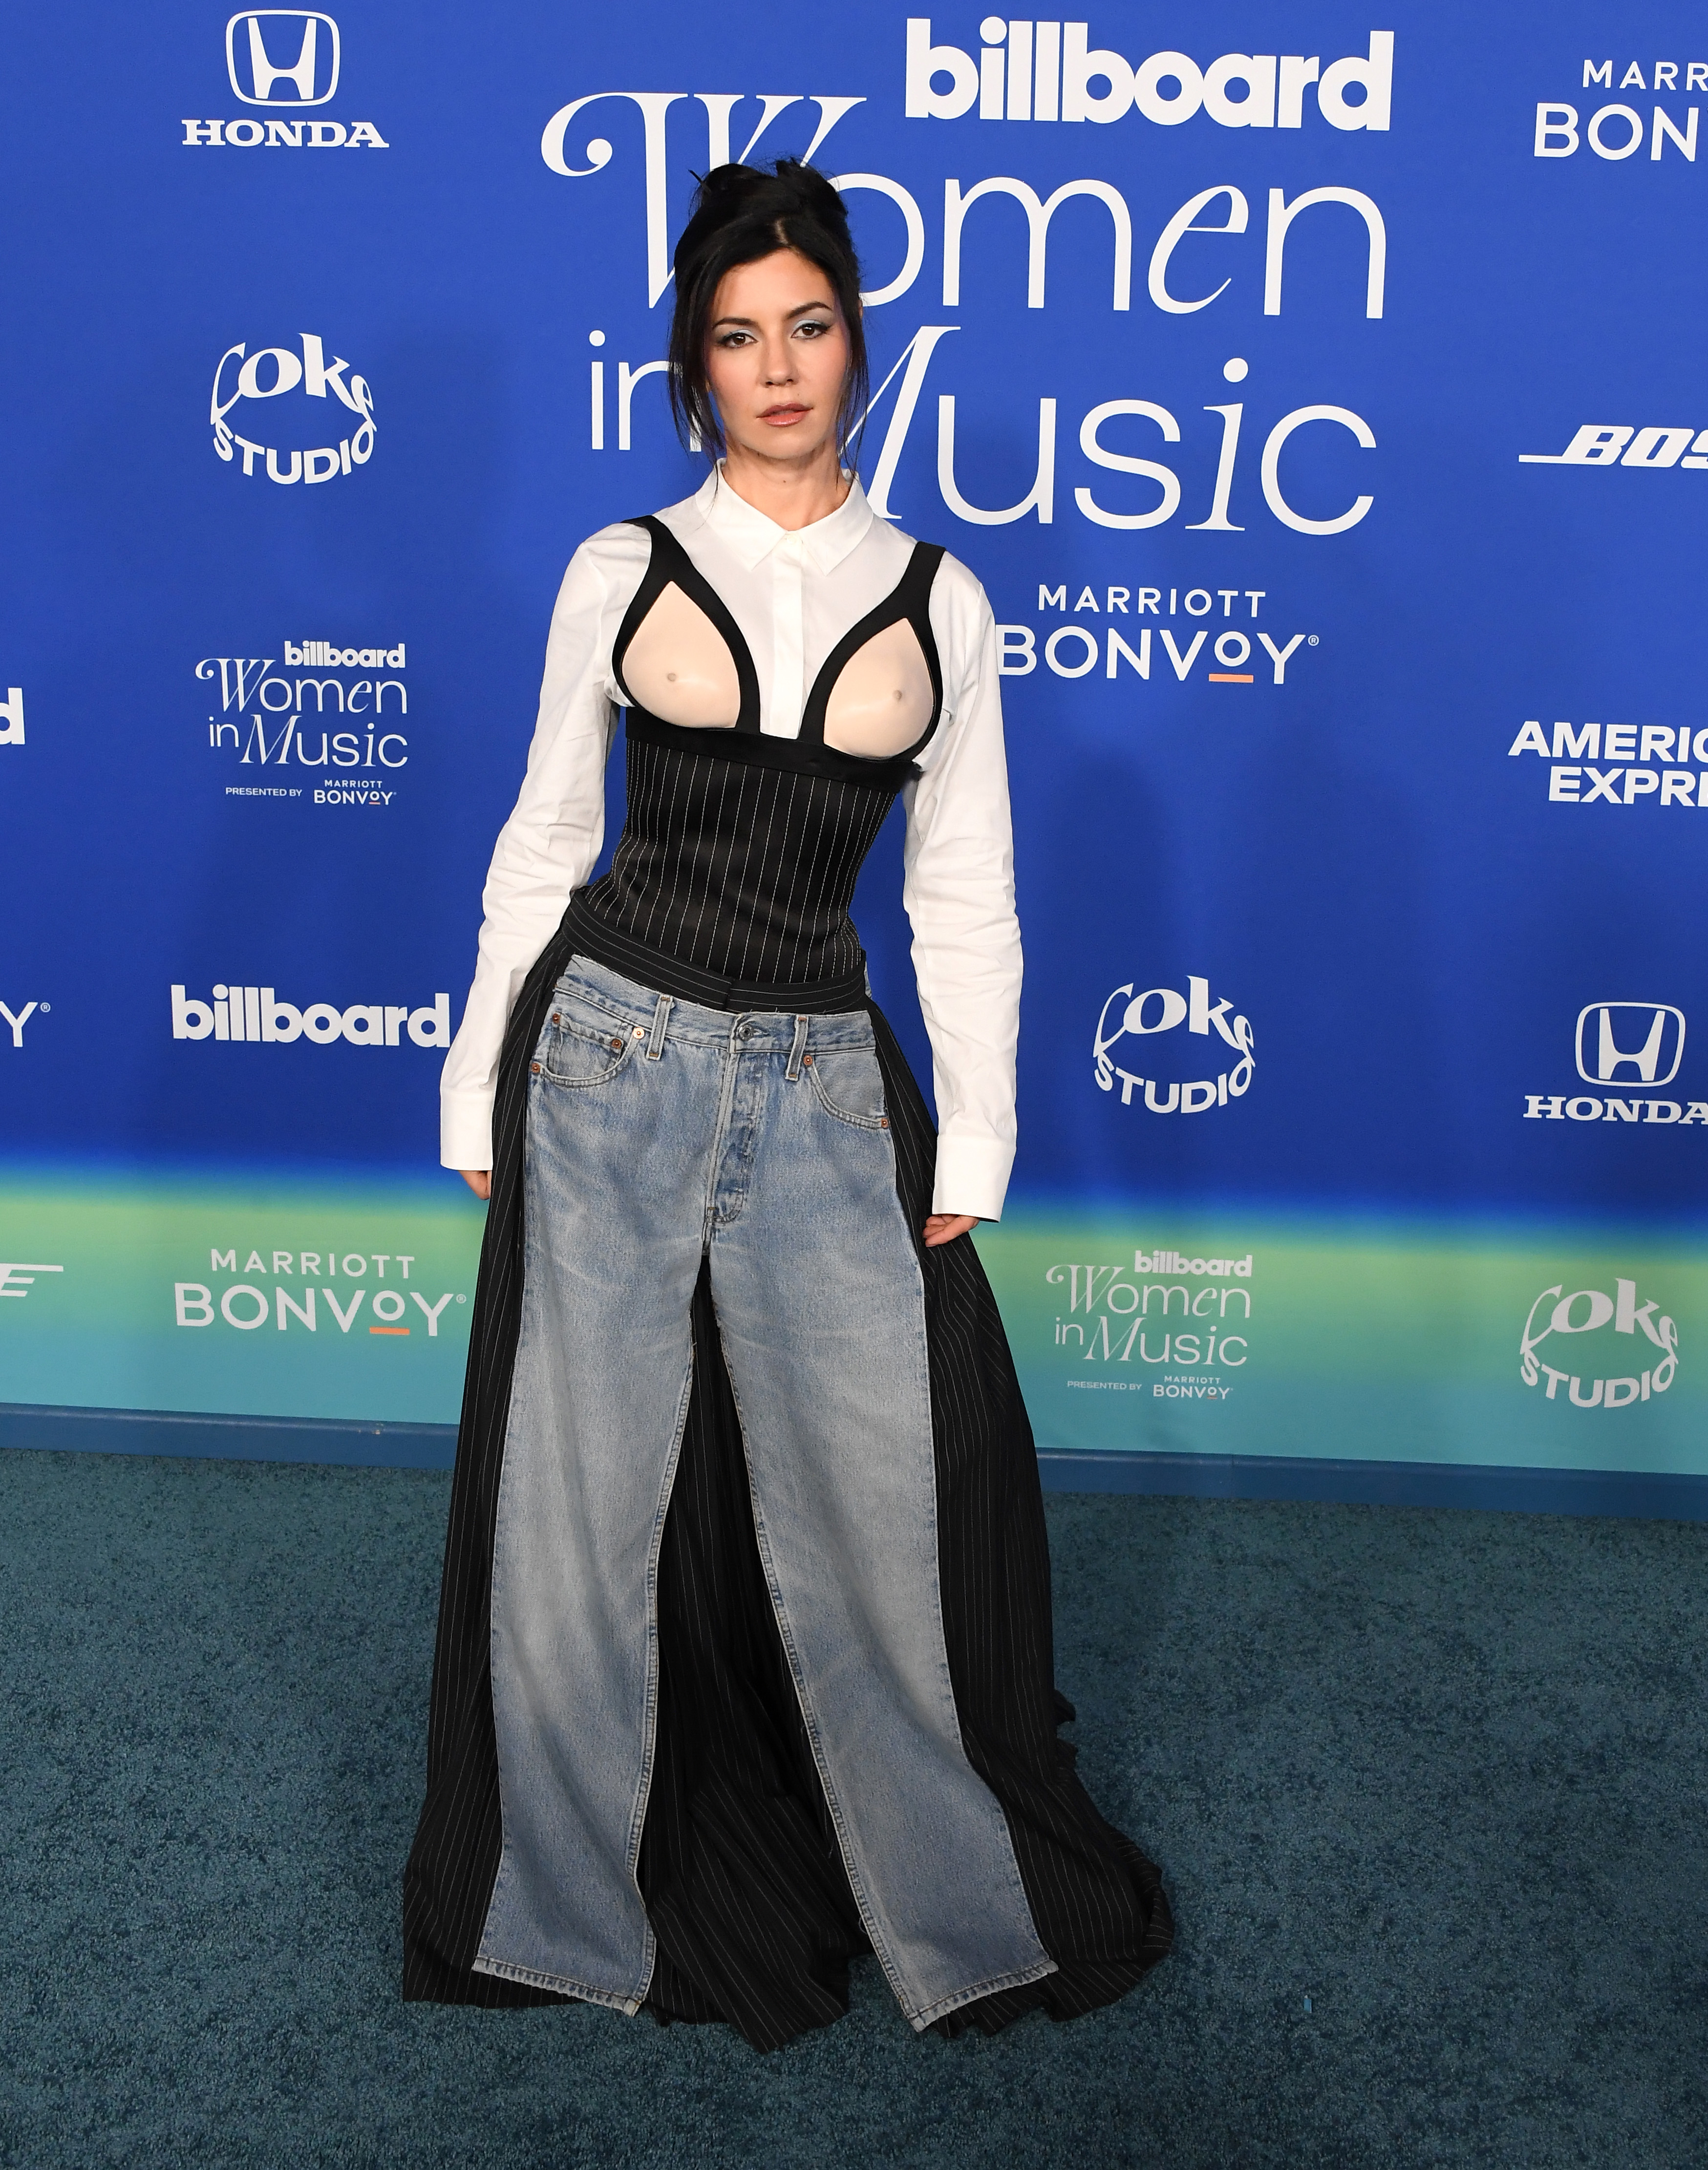 Marina in a pinstripe corset top over a long sleeve buttondown and half denim and pinstripe pants